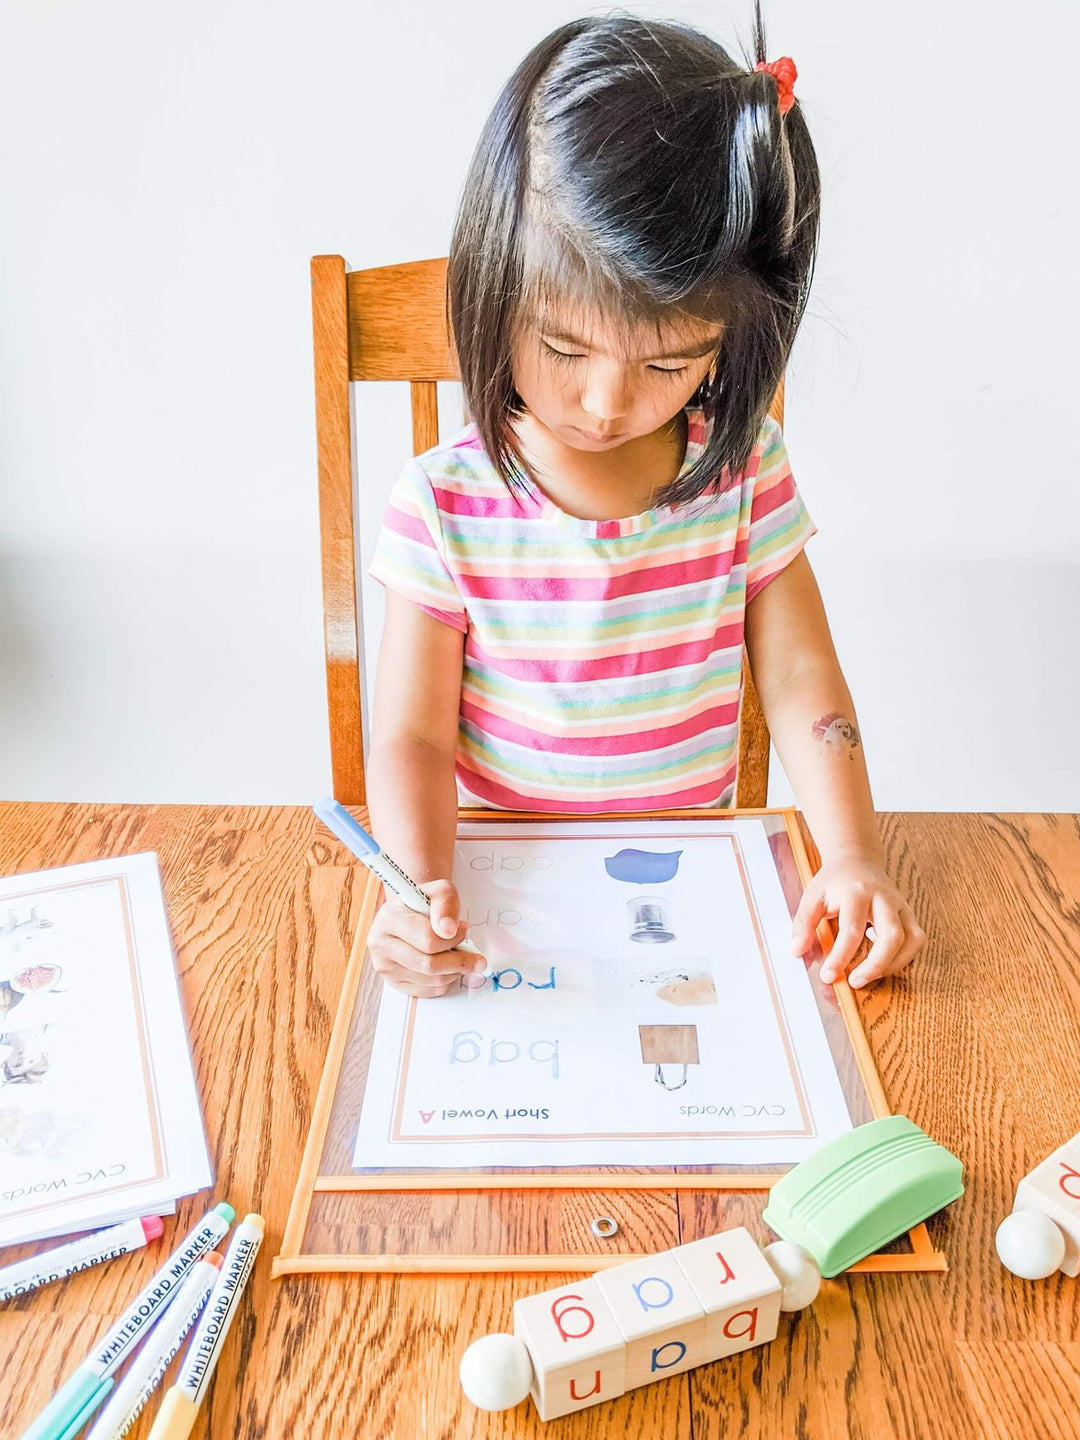 Student Supply Kit for Active Learning at Home || For Preschool, Kindergarten, & Early Elementary School Students - Little Bud Kids